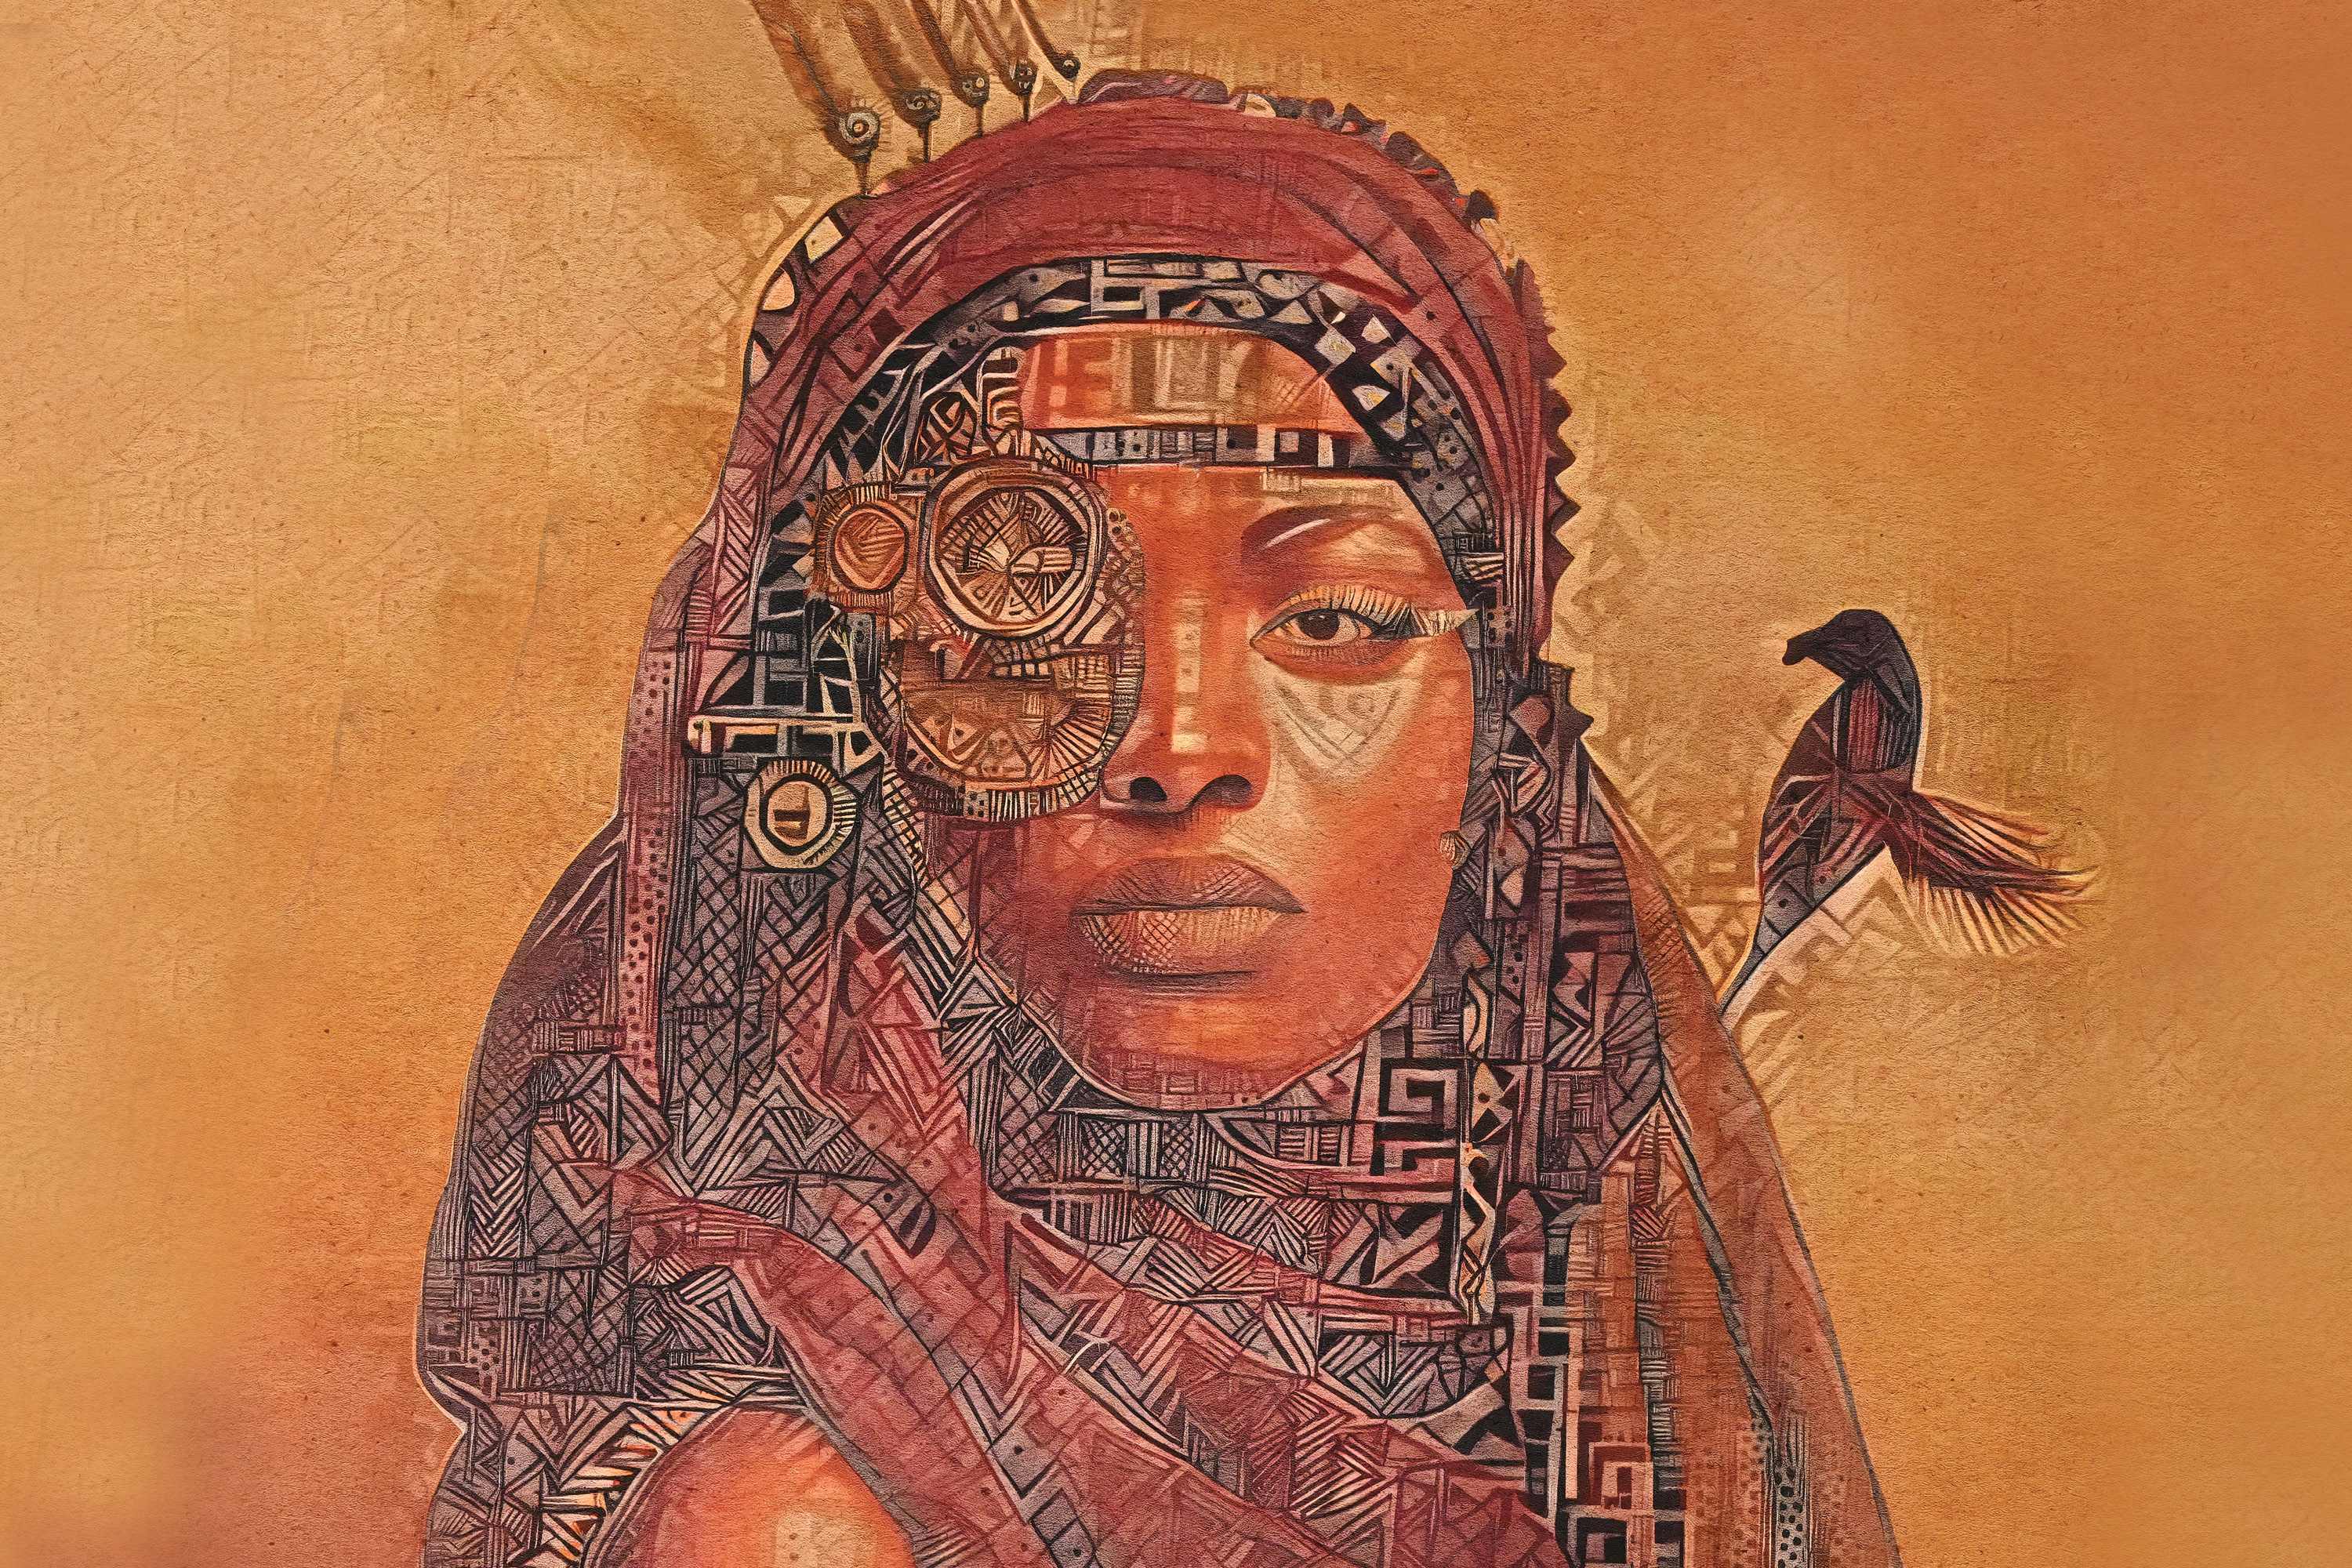 Aishatu Ado, "African Steampunk #3," digital giclee print, part of the 6th Dimension exhibition that debuted at Conn.